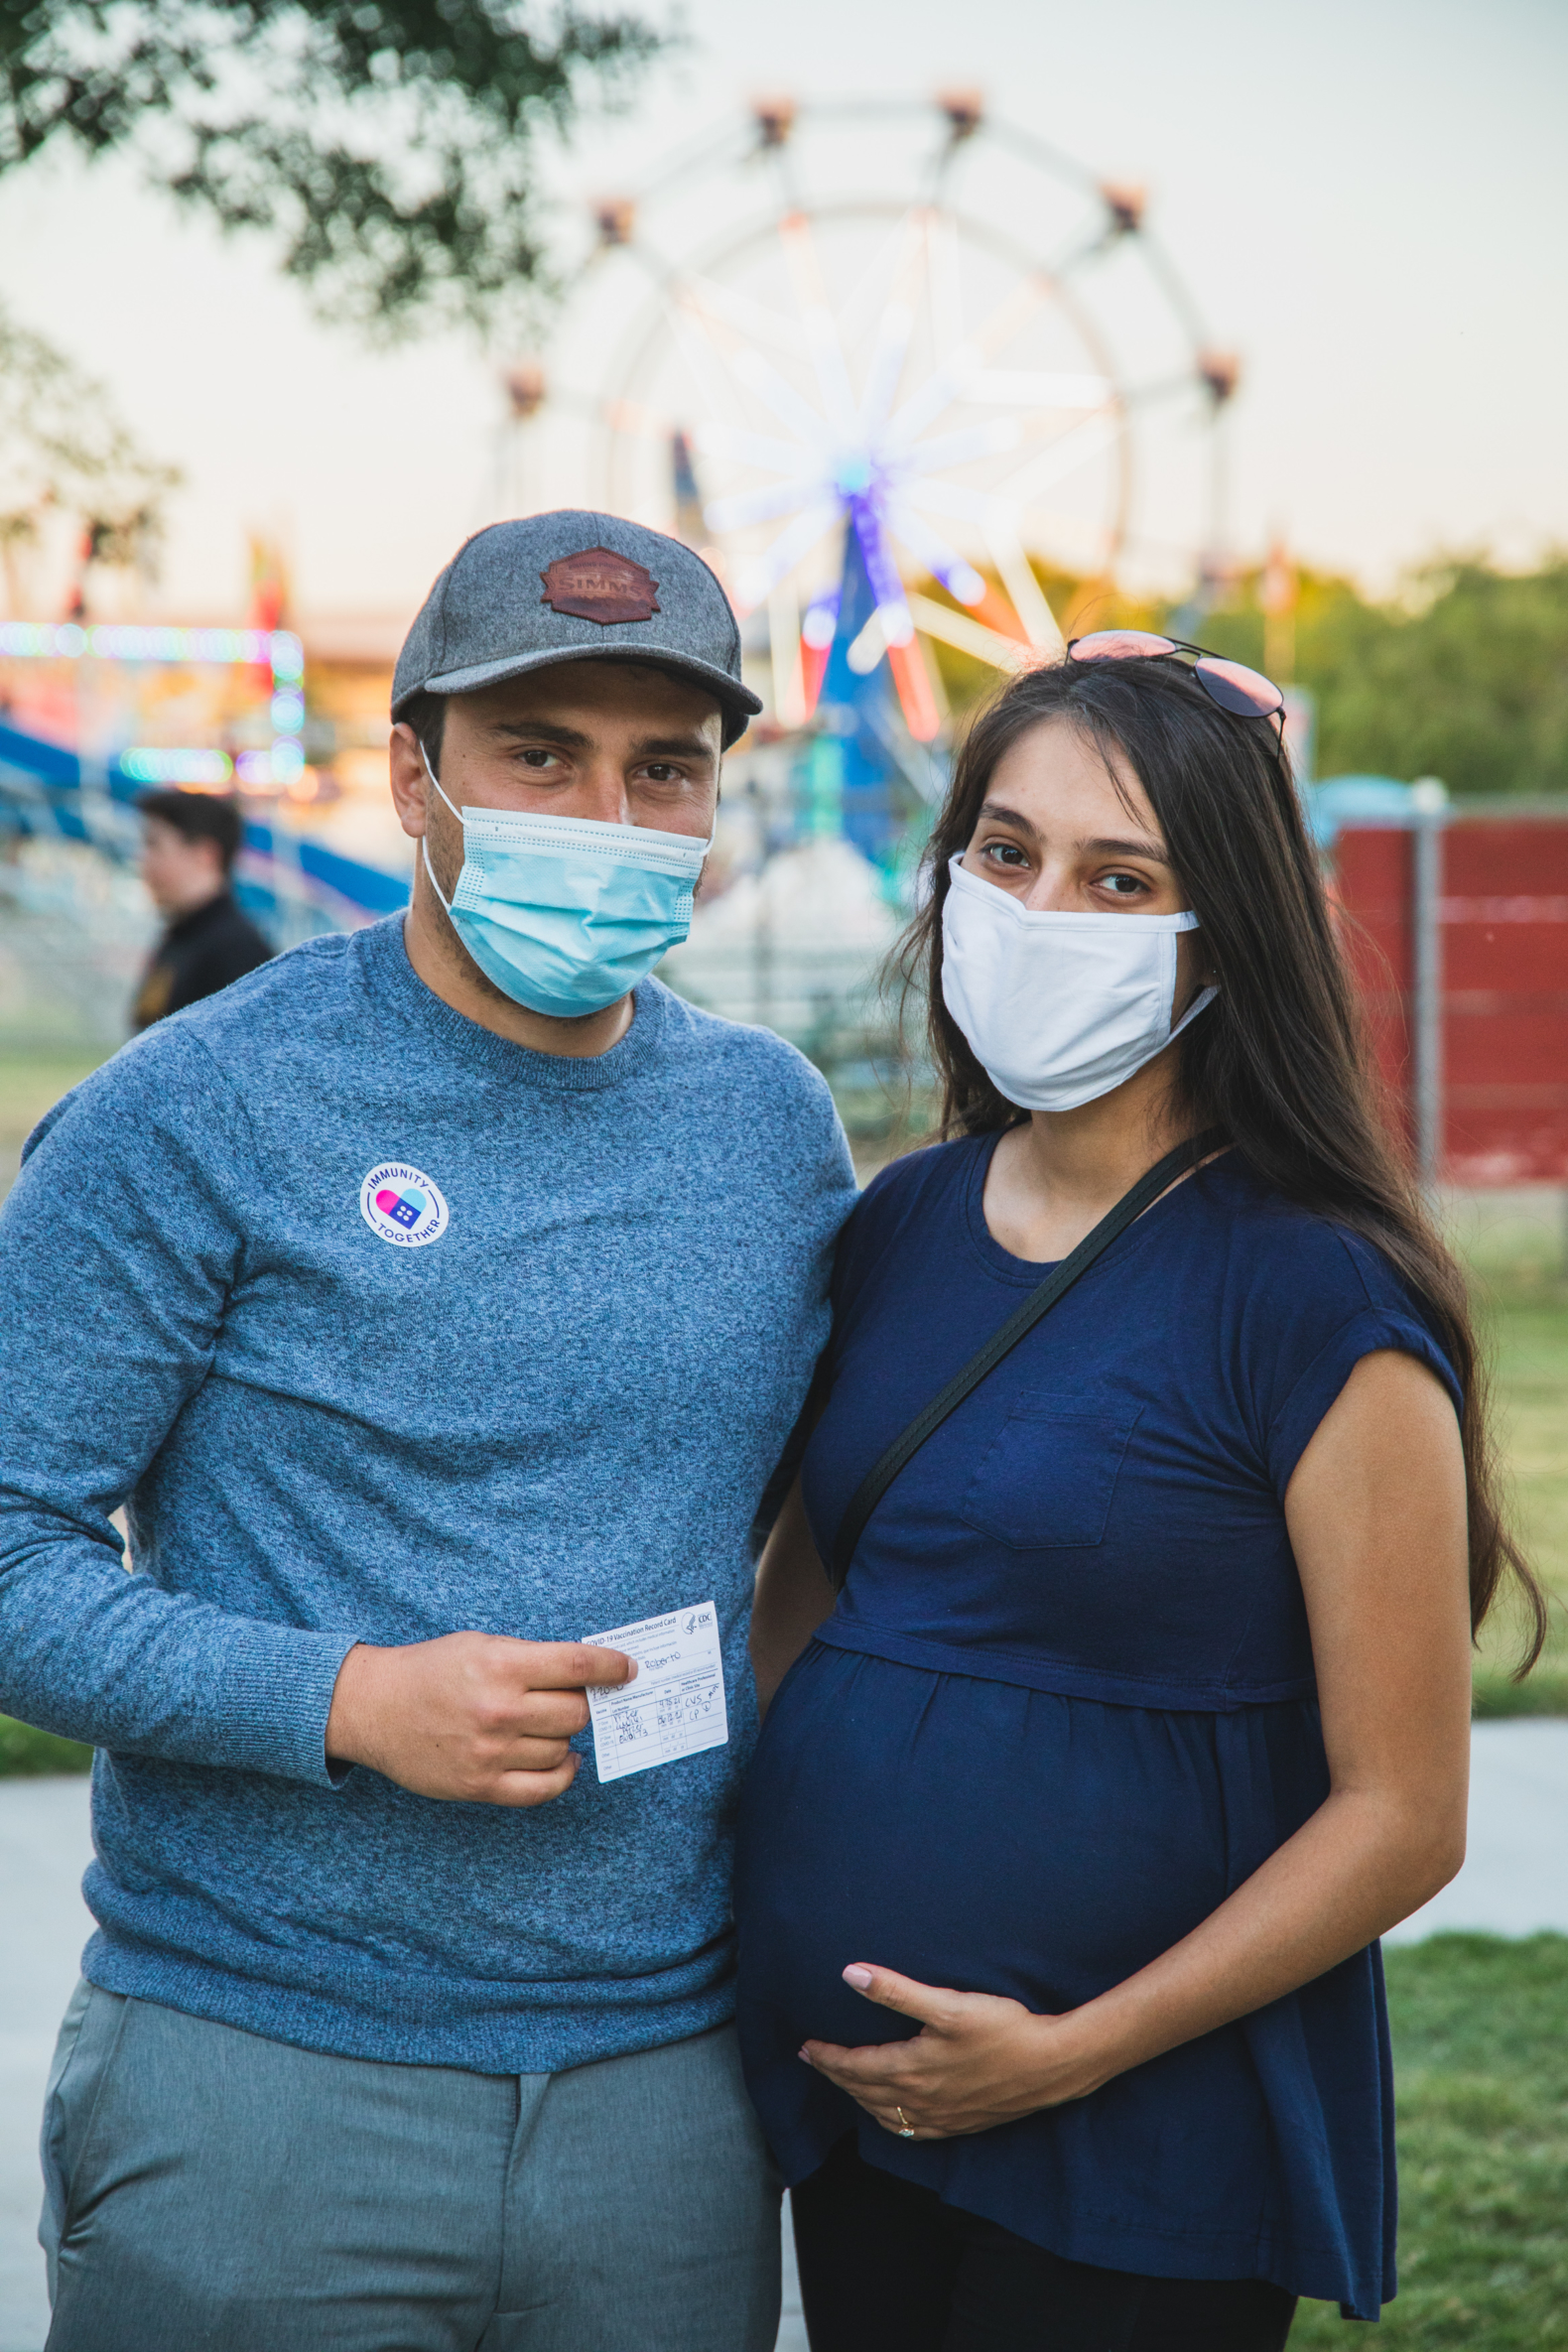 A couple stands together in front of carnival, both are wearing masks and one displays their vaccination card and the other is pregnant. Both are wearing masks.